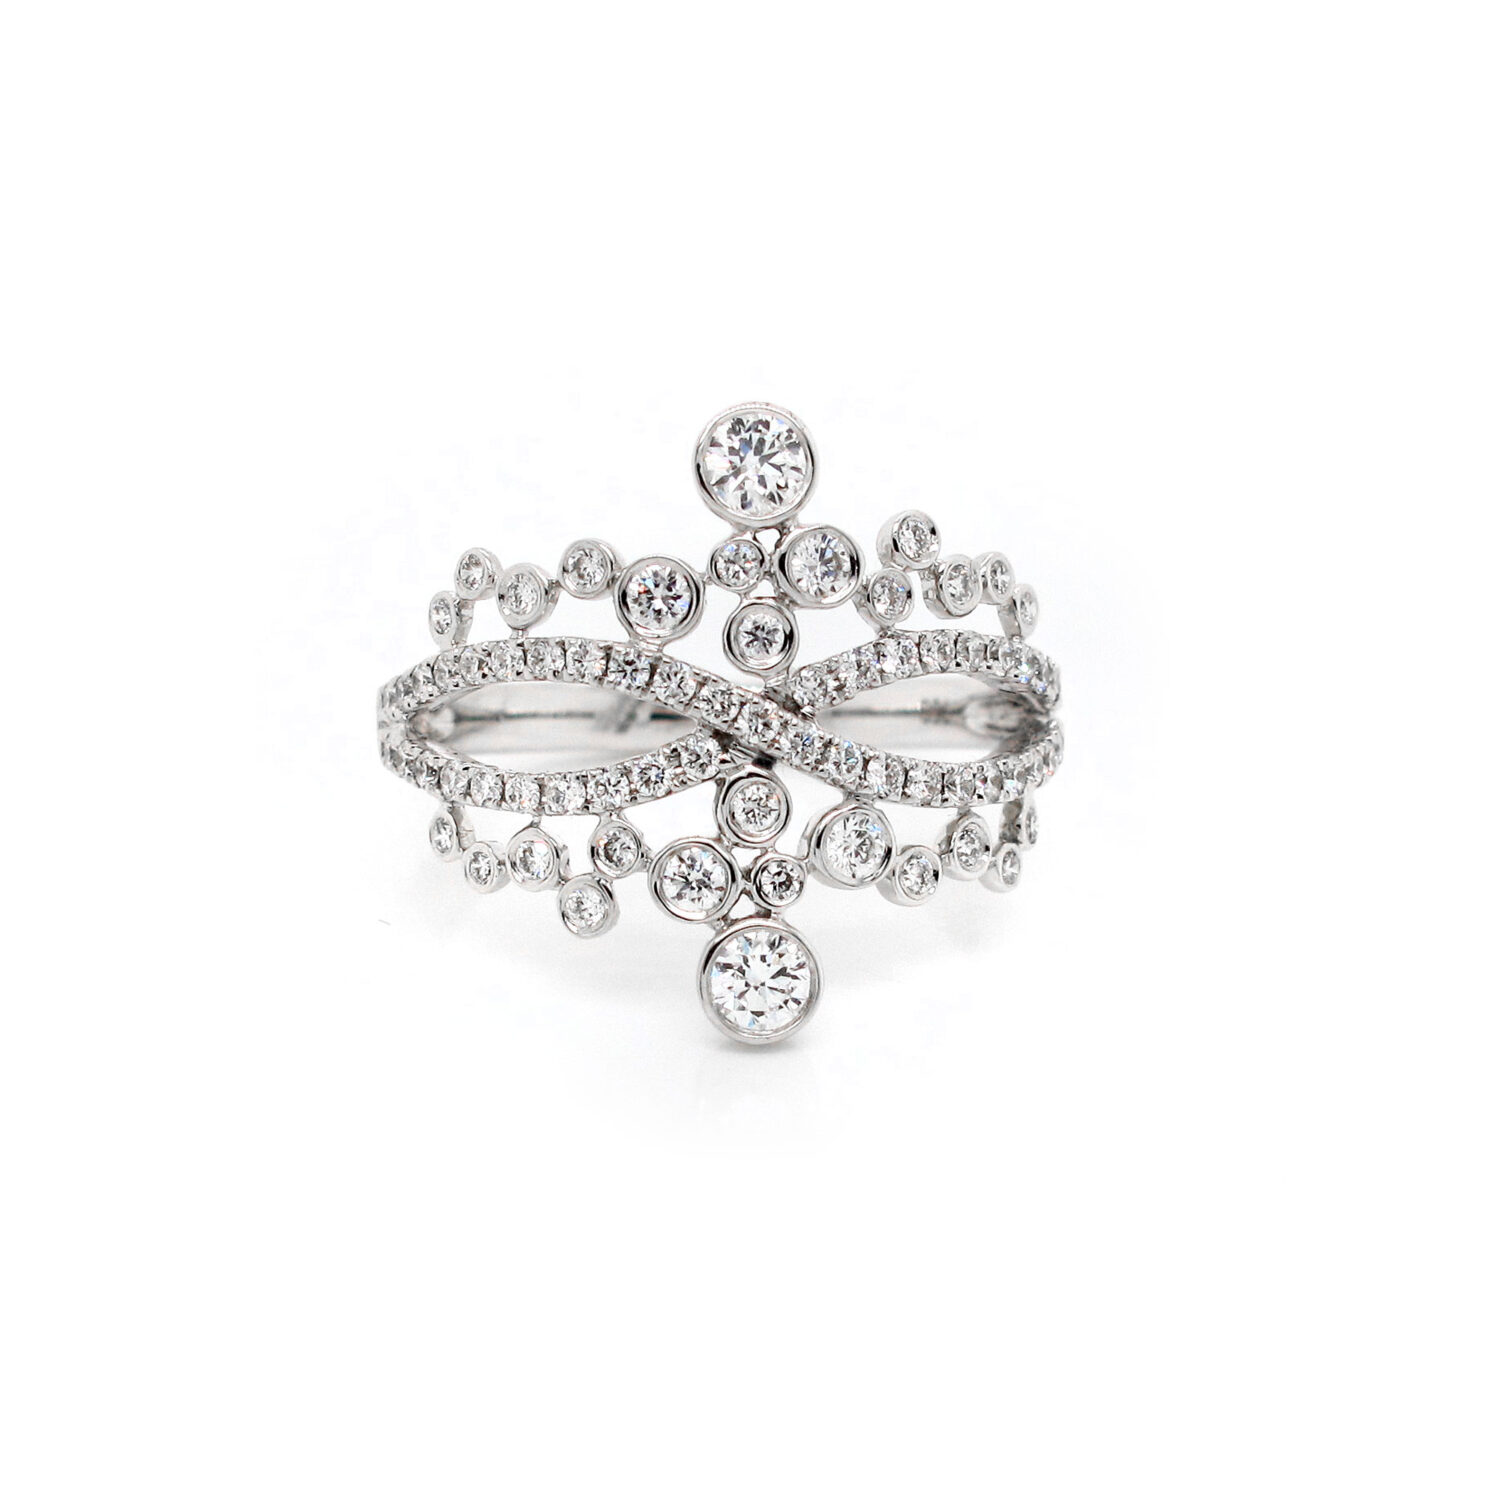 Diamond Crown Ring 18k White Gold - Richards Gems and Jewelry